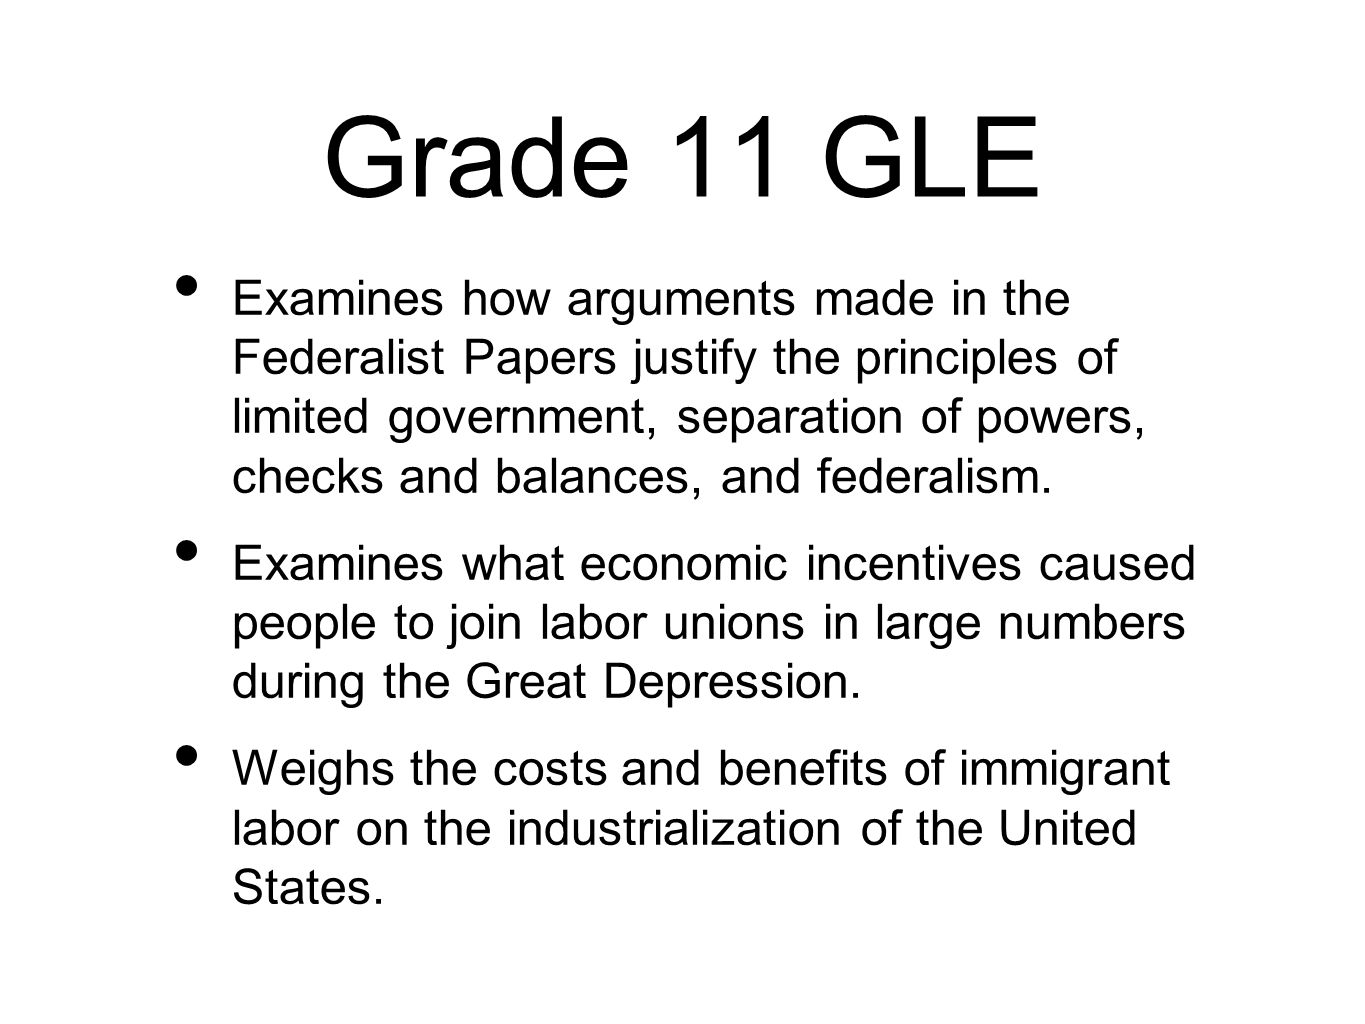 Grade 11 GLE Examines how arguments made in the Federalist Papers justify the principles of limited government, separation of powers, checks and balances, and federalism.